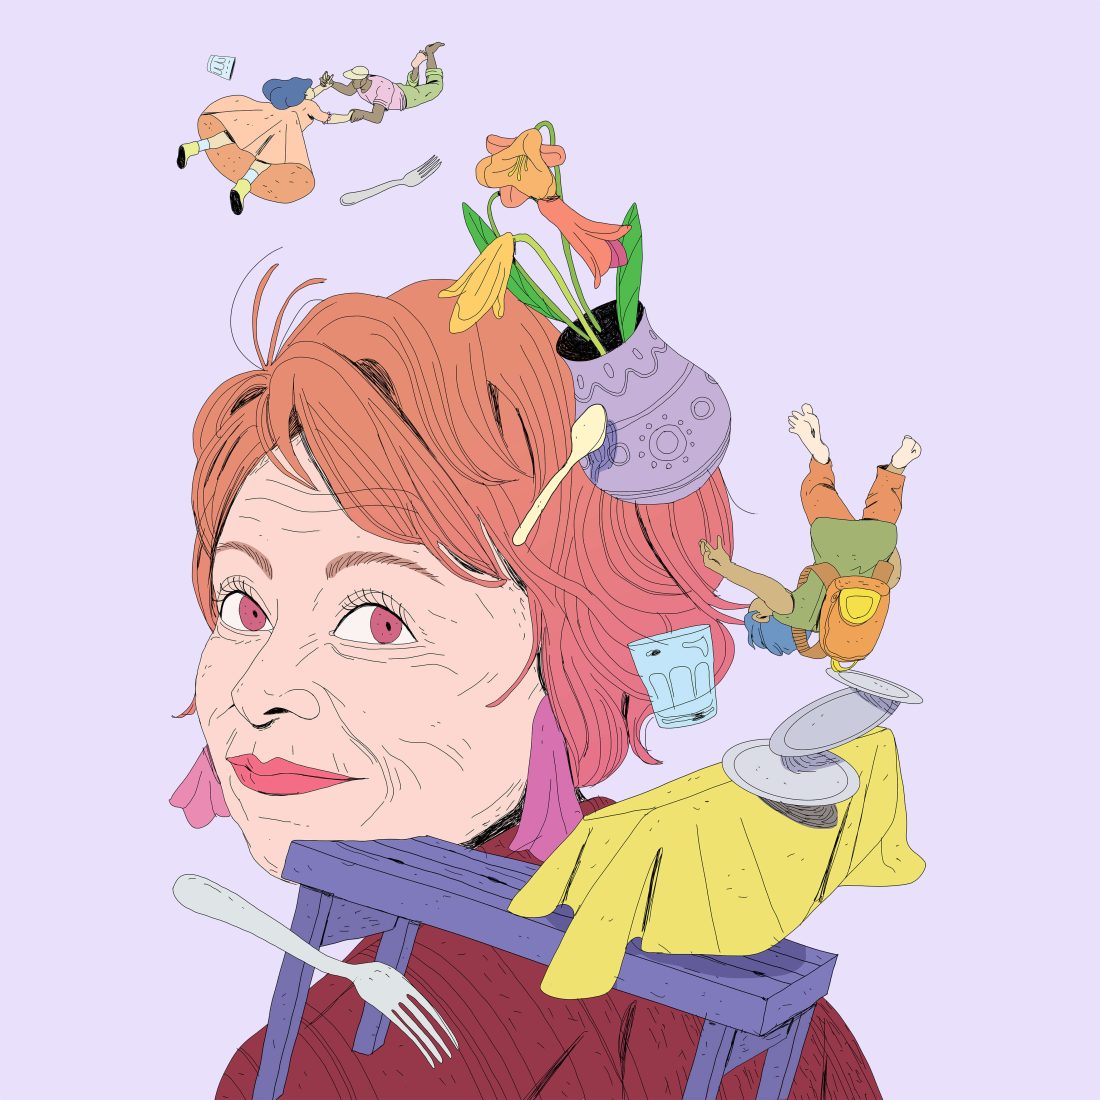 A portrait of Isabel Allende, with elements and characters from her books flying around her in a surreal way